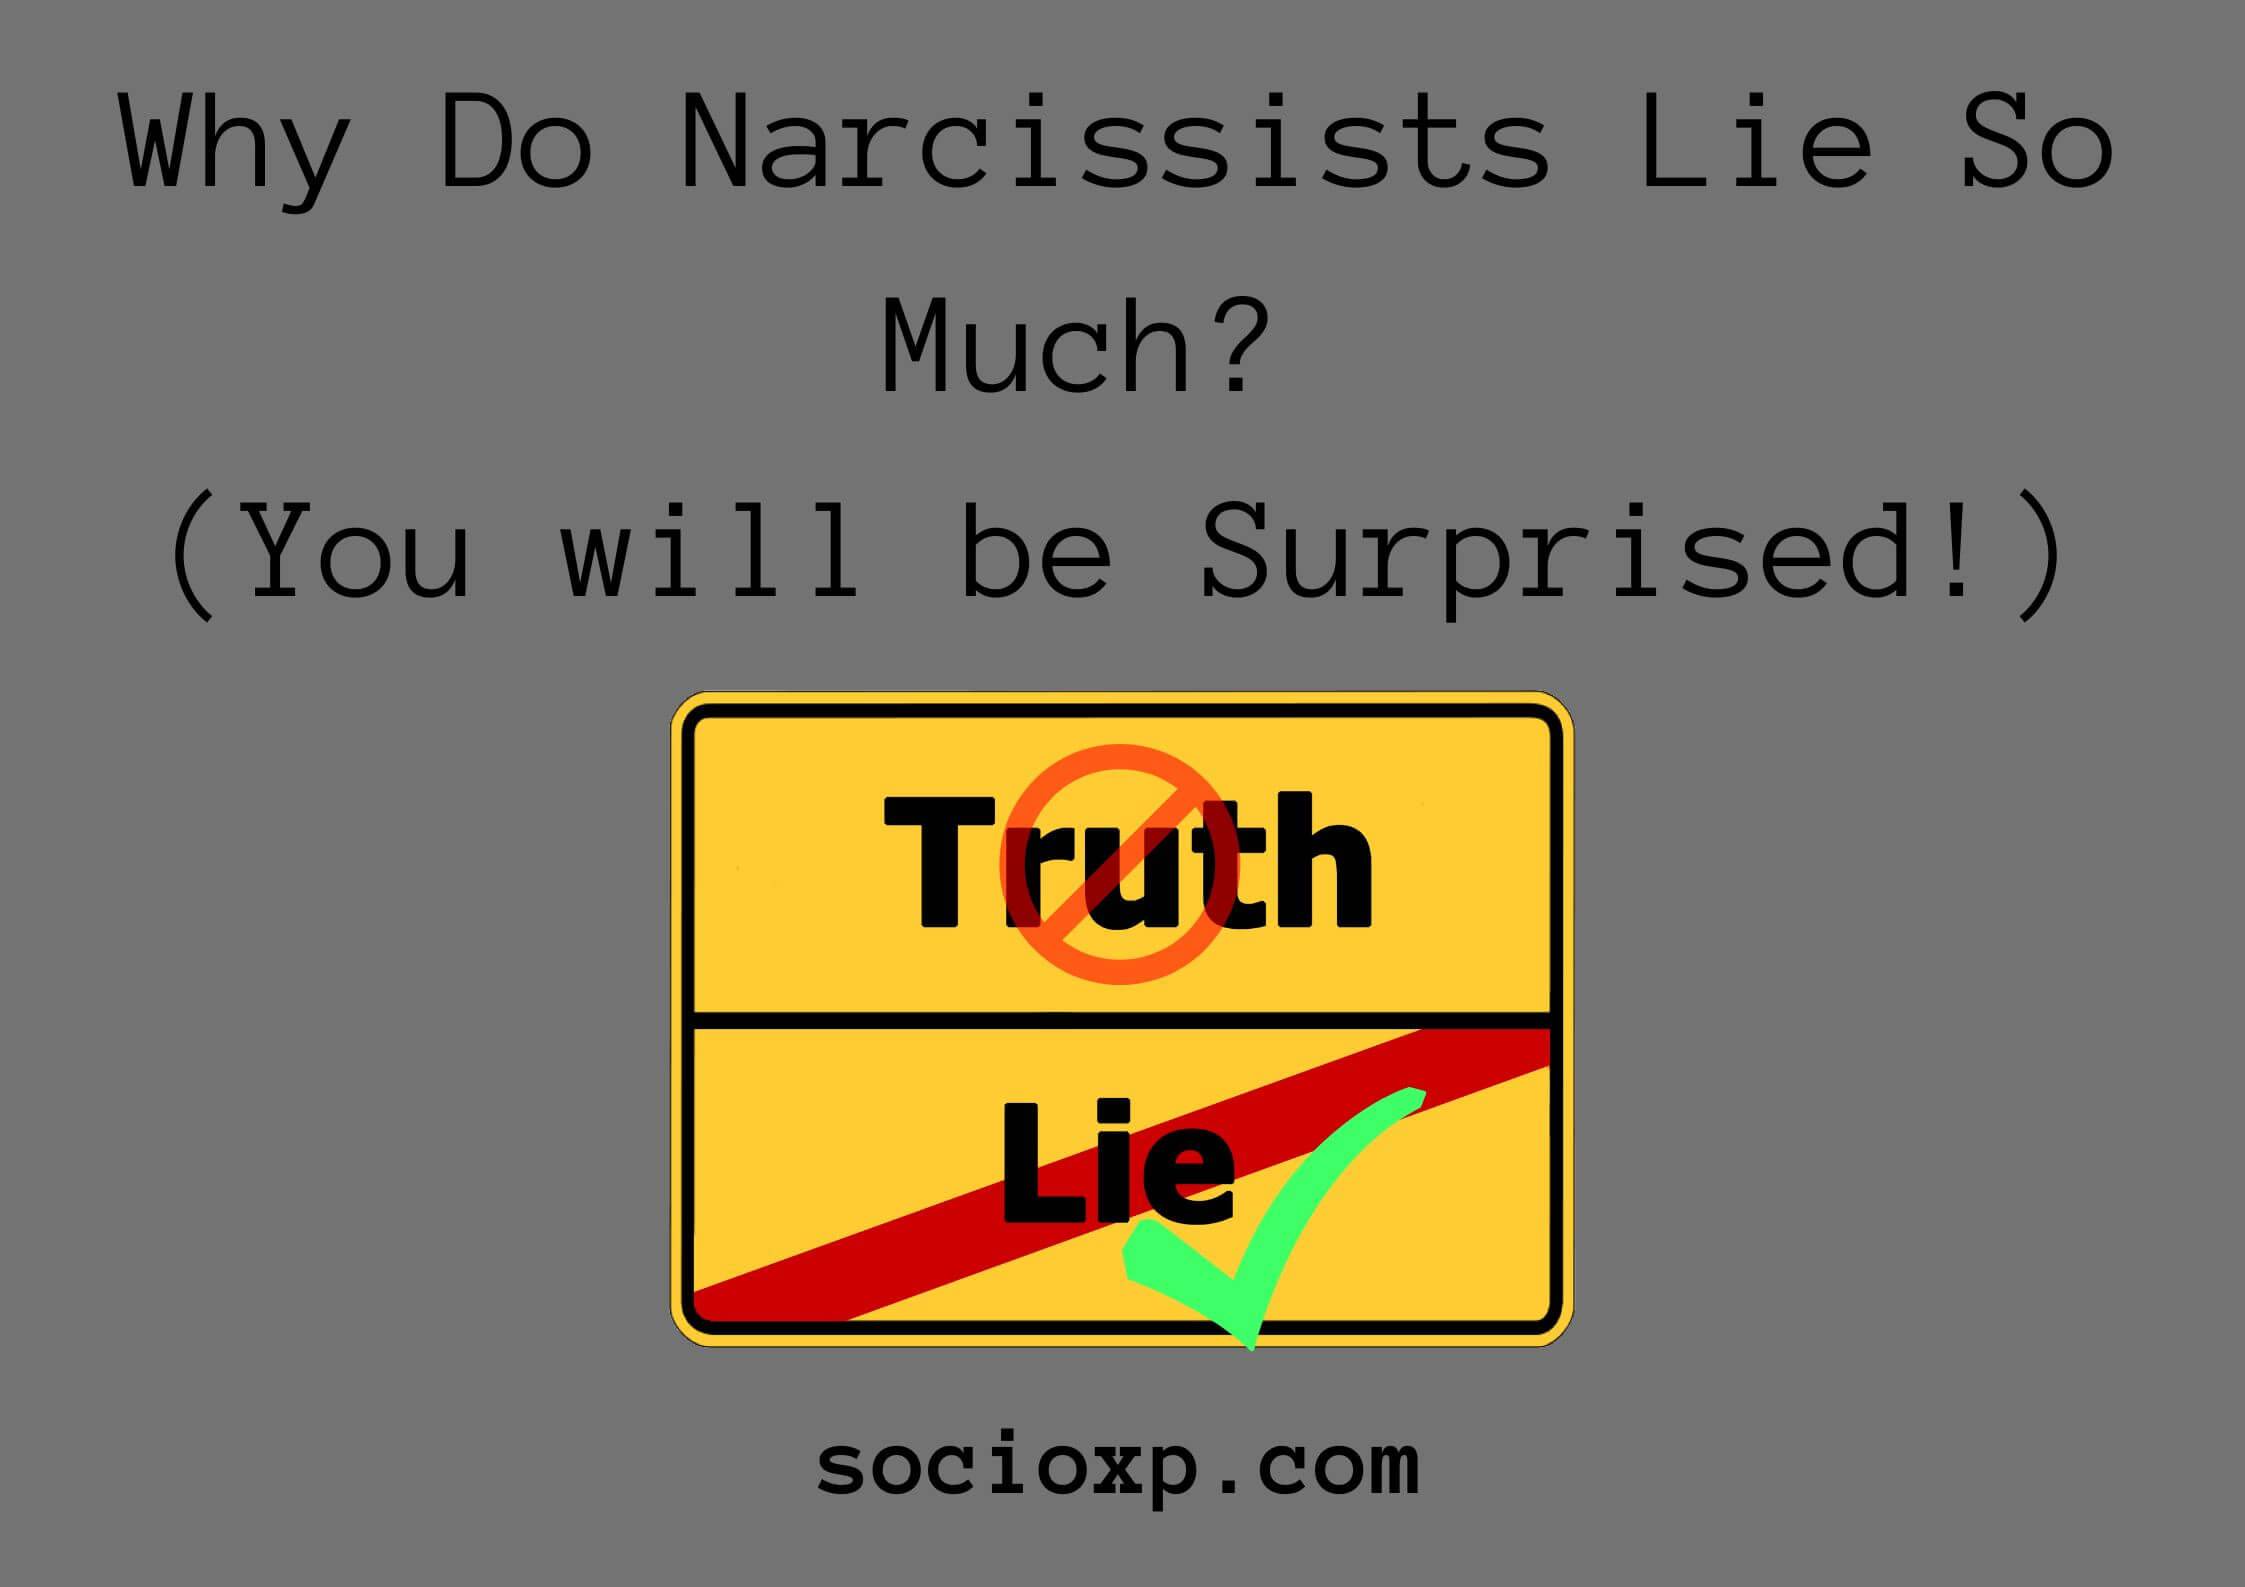 Why Do Narcissists Lie So Much? (You will be Surprised!)